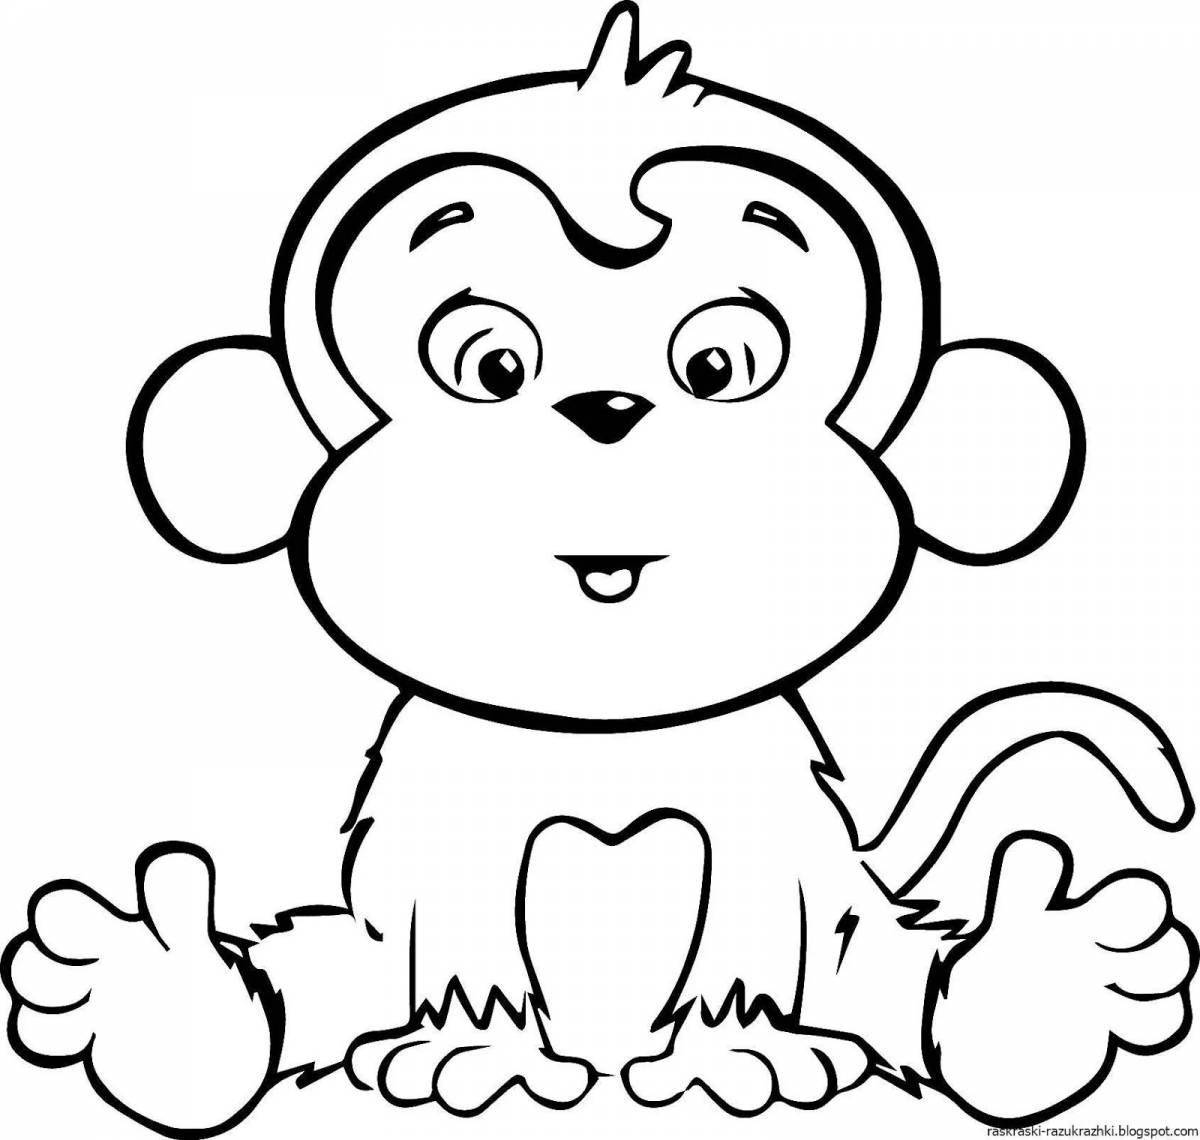 Sparkling monkey coloring book